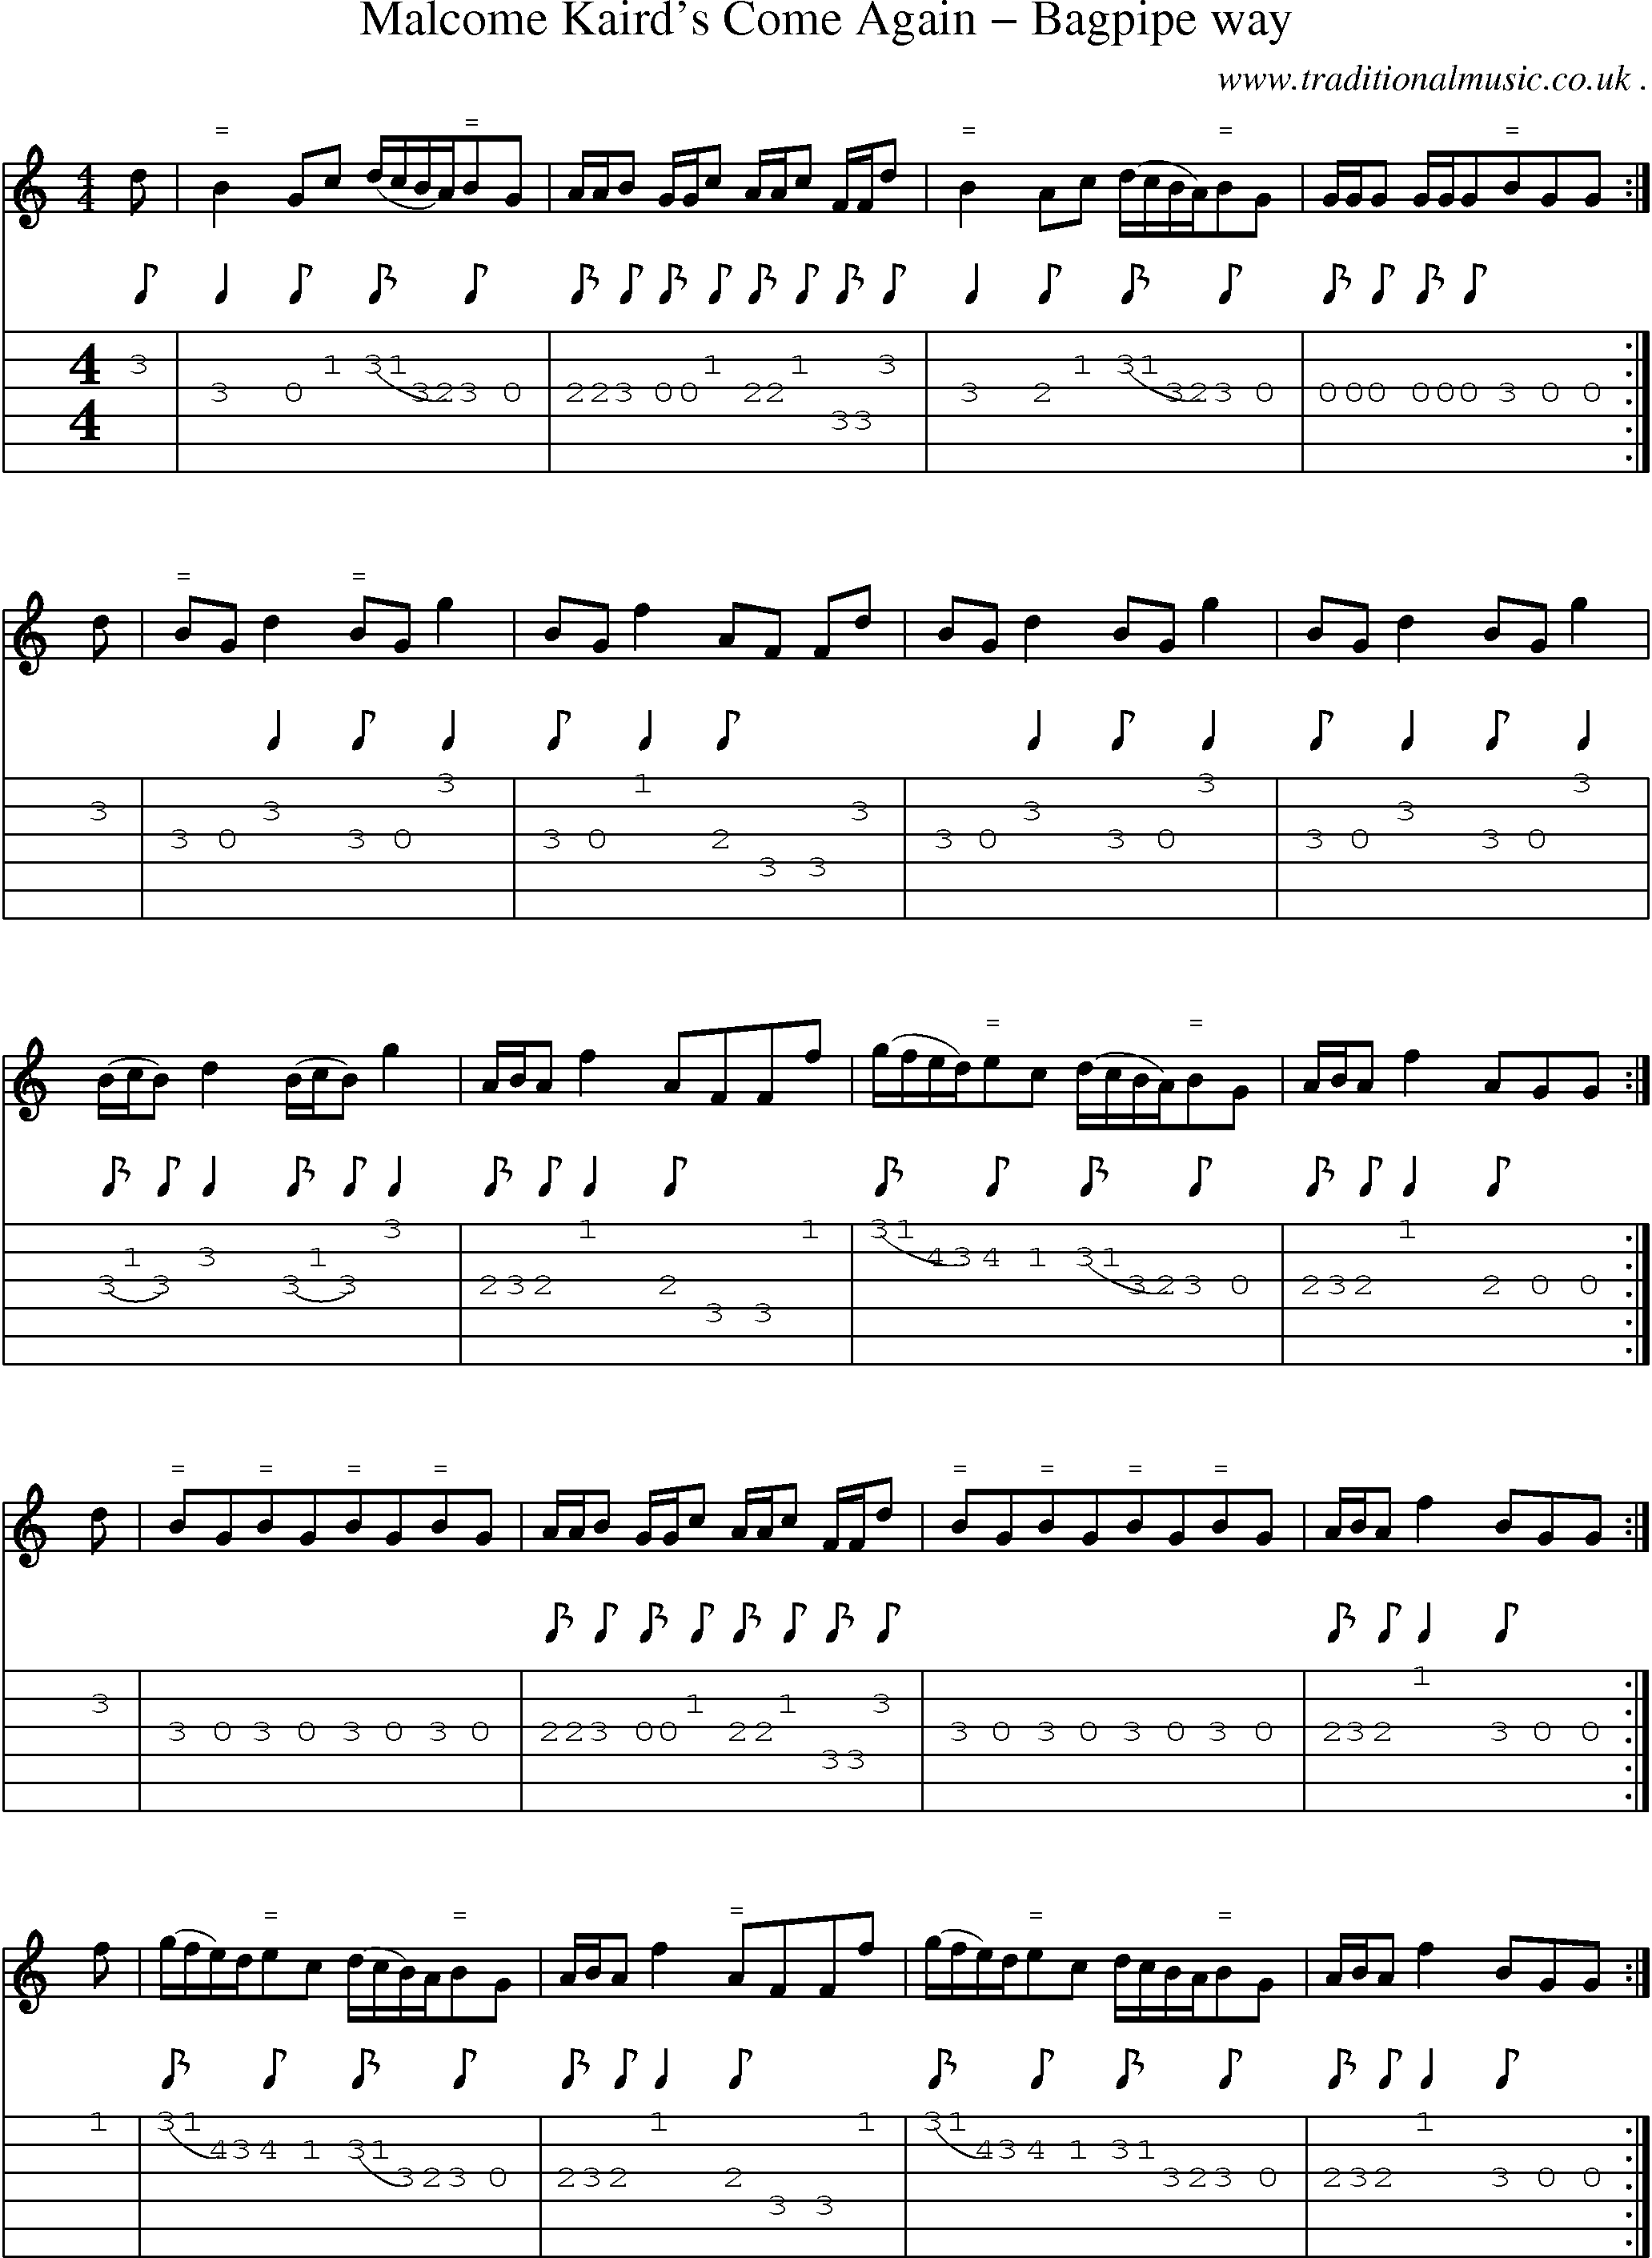 Sheet-Music and Guitar Tabs for Malcome Kairds Come Again Bagpipe Way